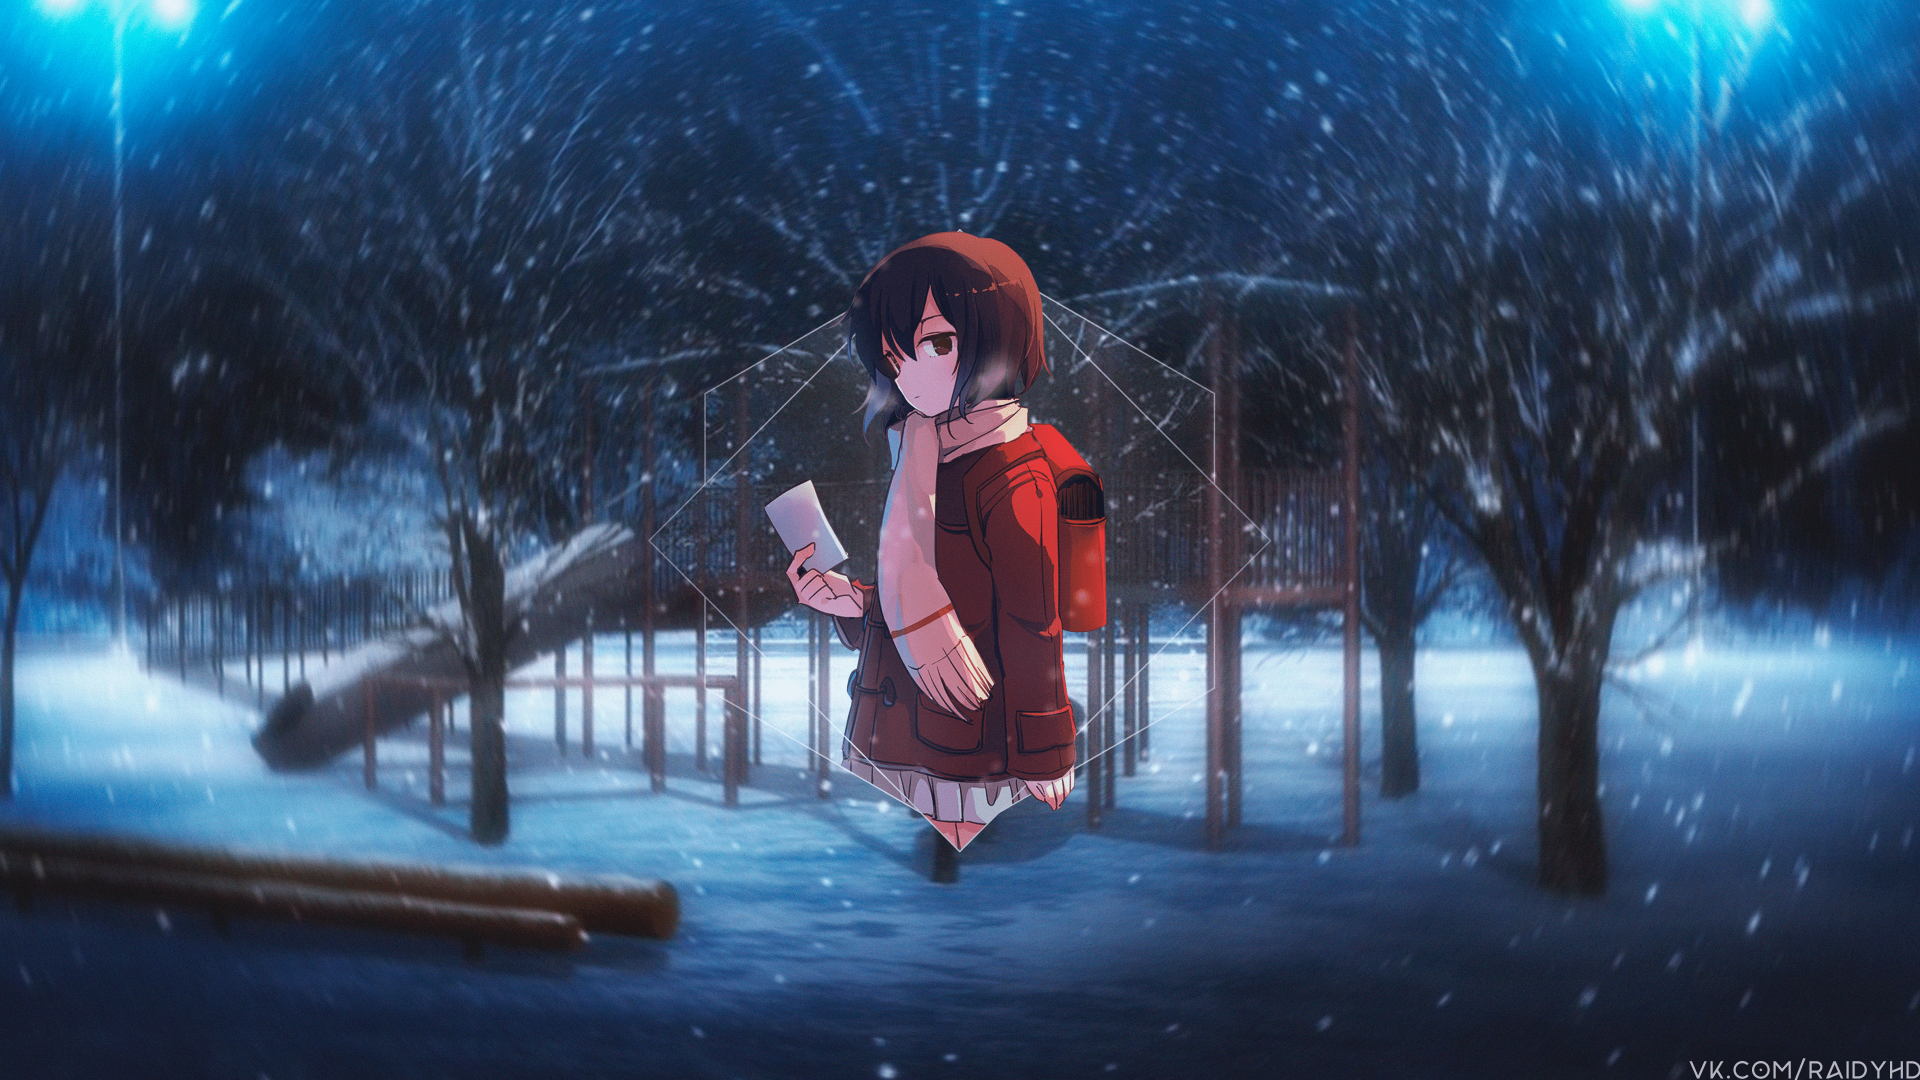 Sunday Ultra HD Wallpapers 😁 📽, Anime : Erased 🍿